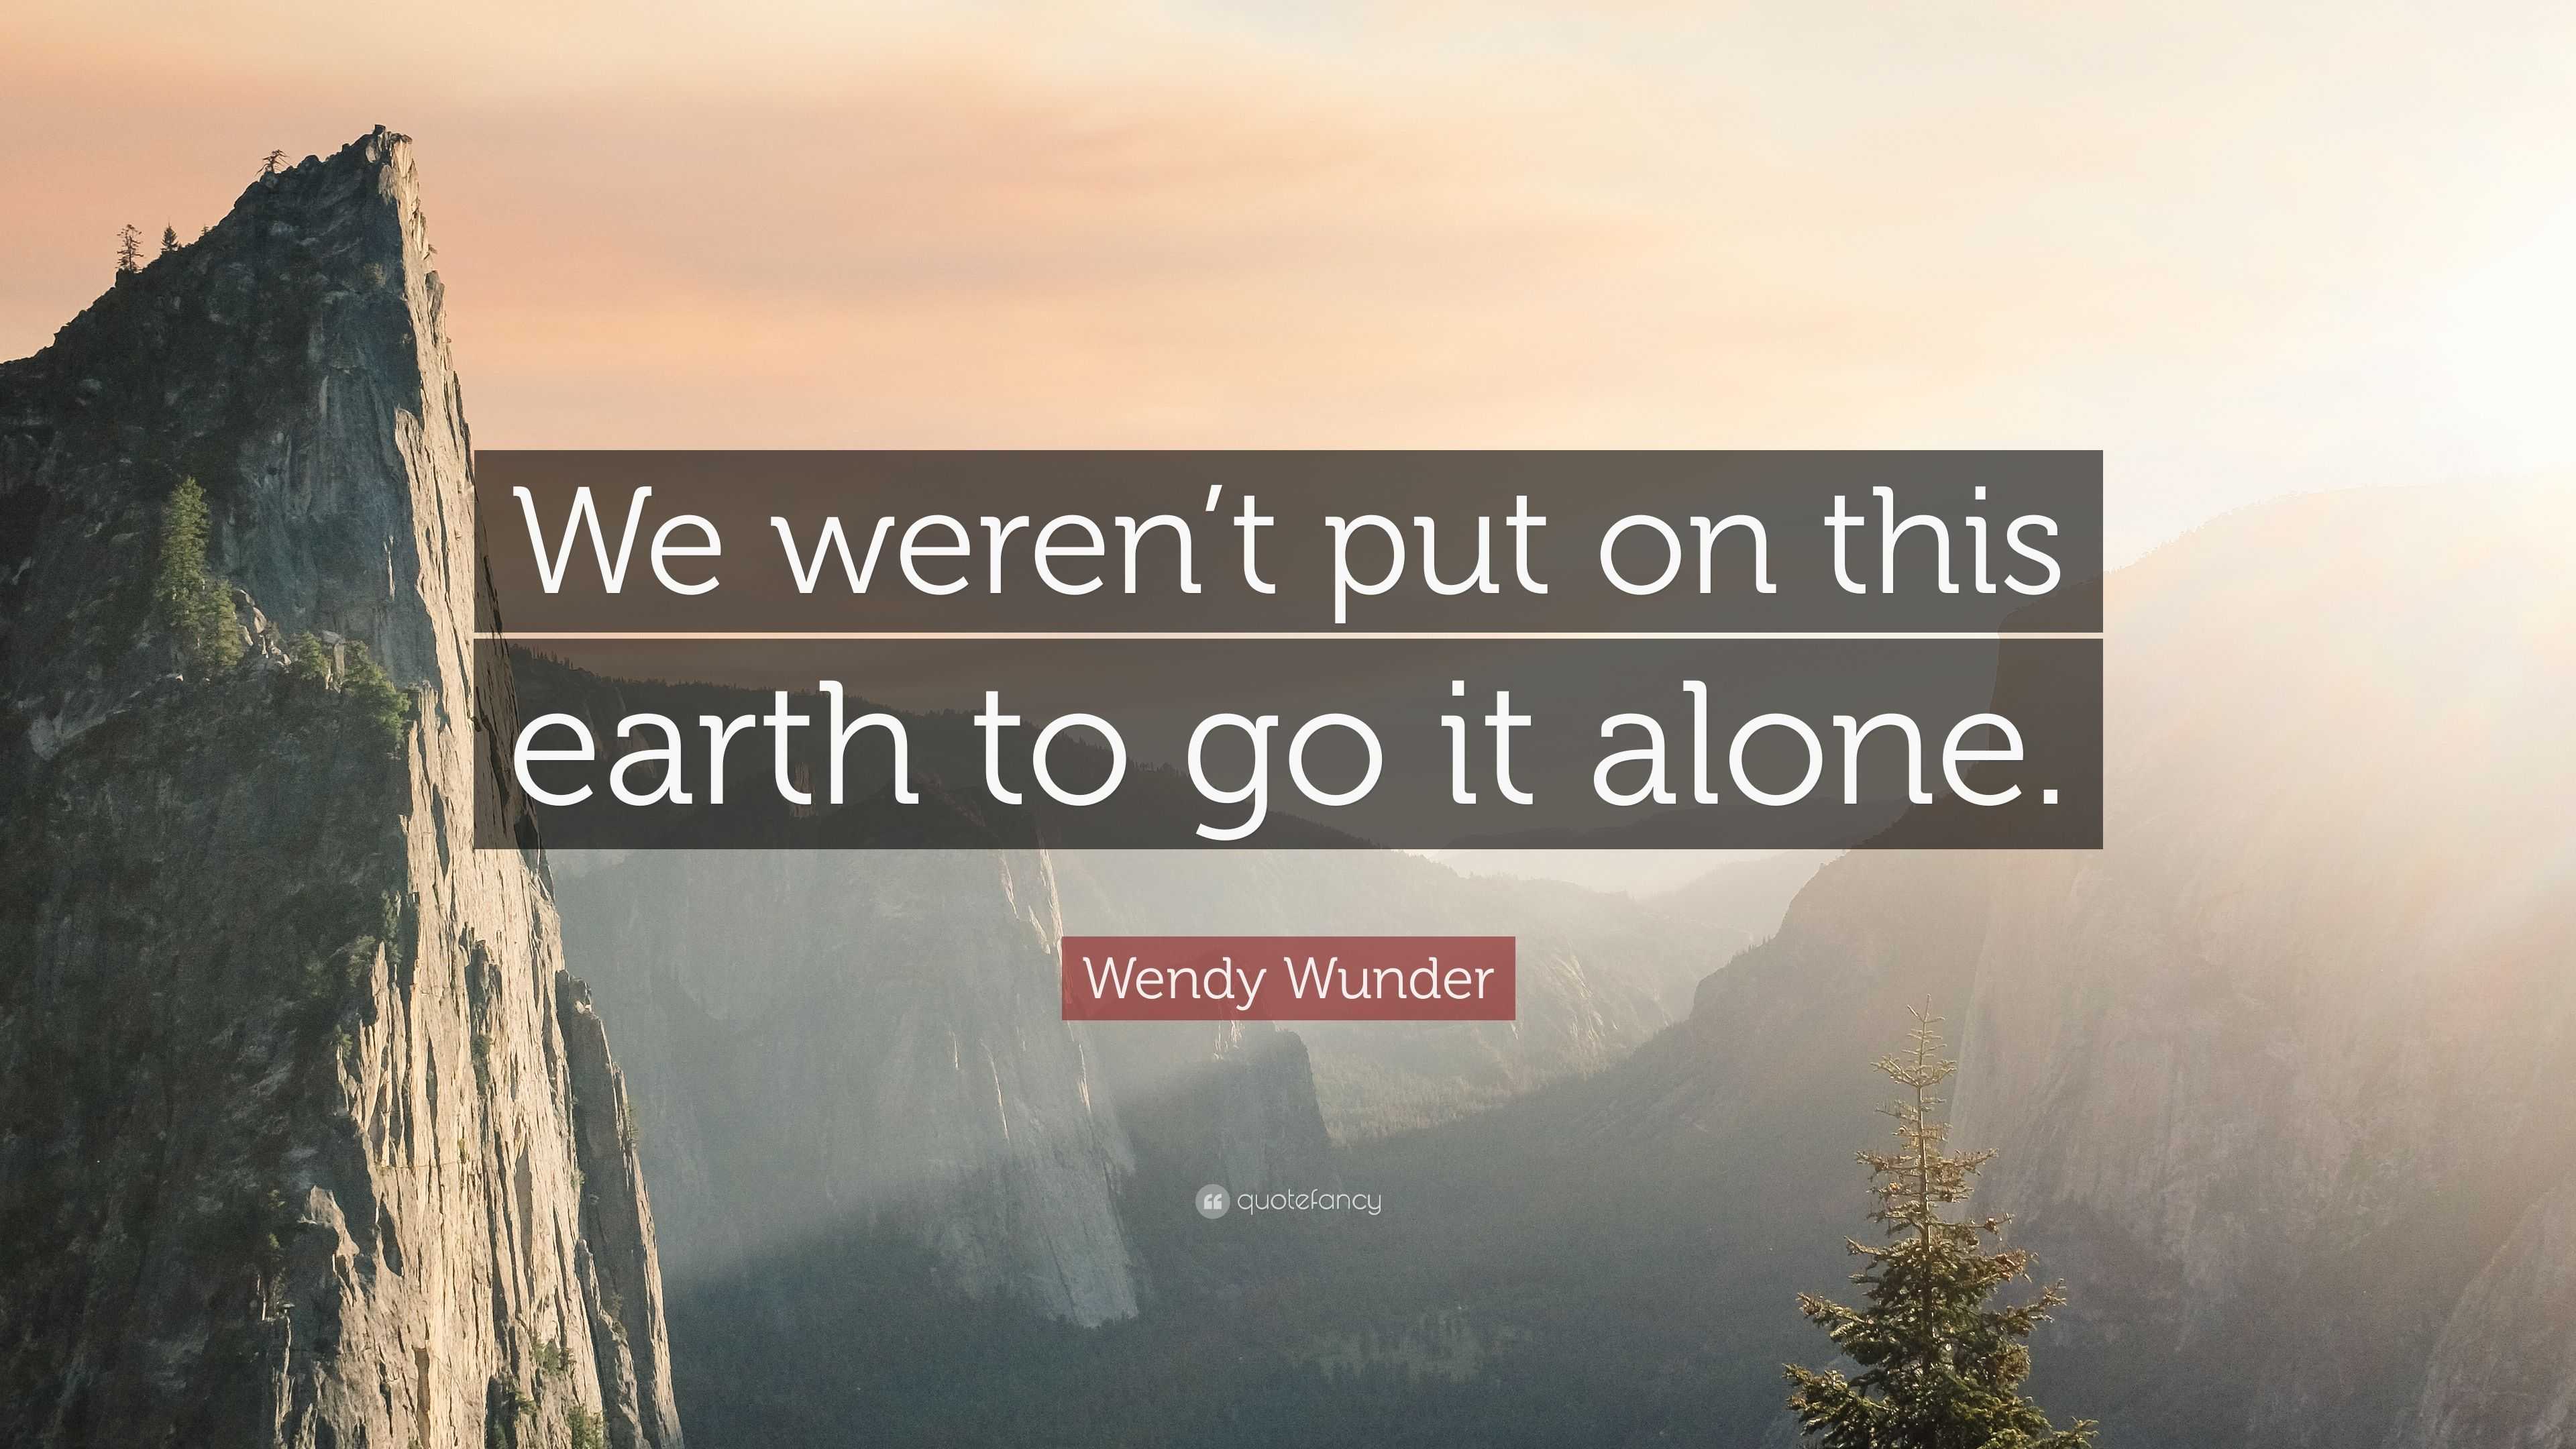 https://quotefancy.com/media/wallpaper/3840x2160/6028957-Wendy-Wunder-Quote-We-weren-t-put-on-this-earth-to-go-it-alone.jpg